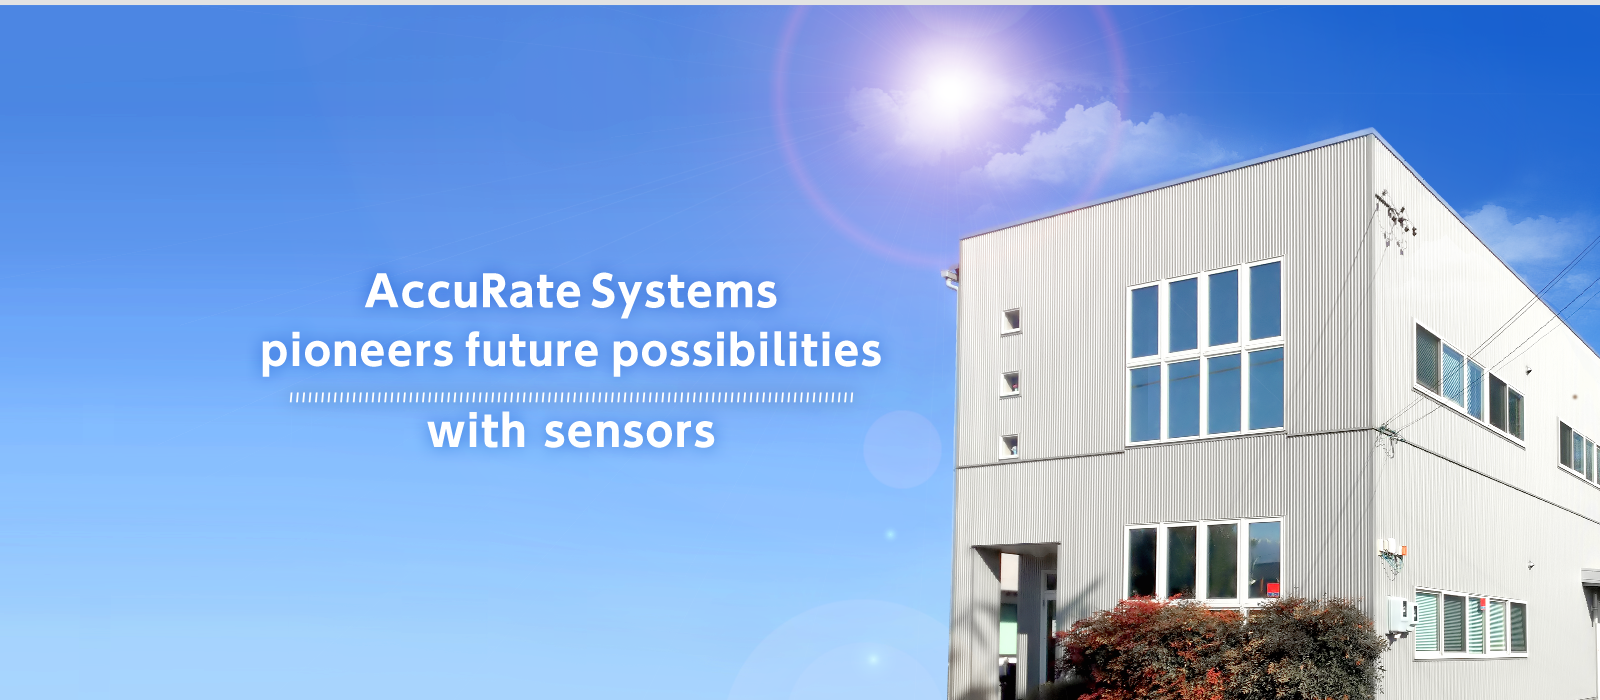 Accurate Systems pioneers future possibilities with sensors.